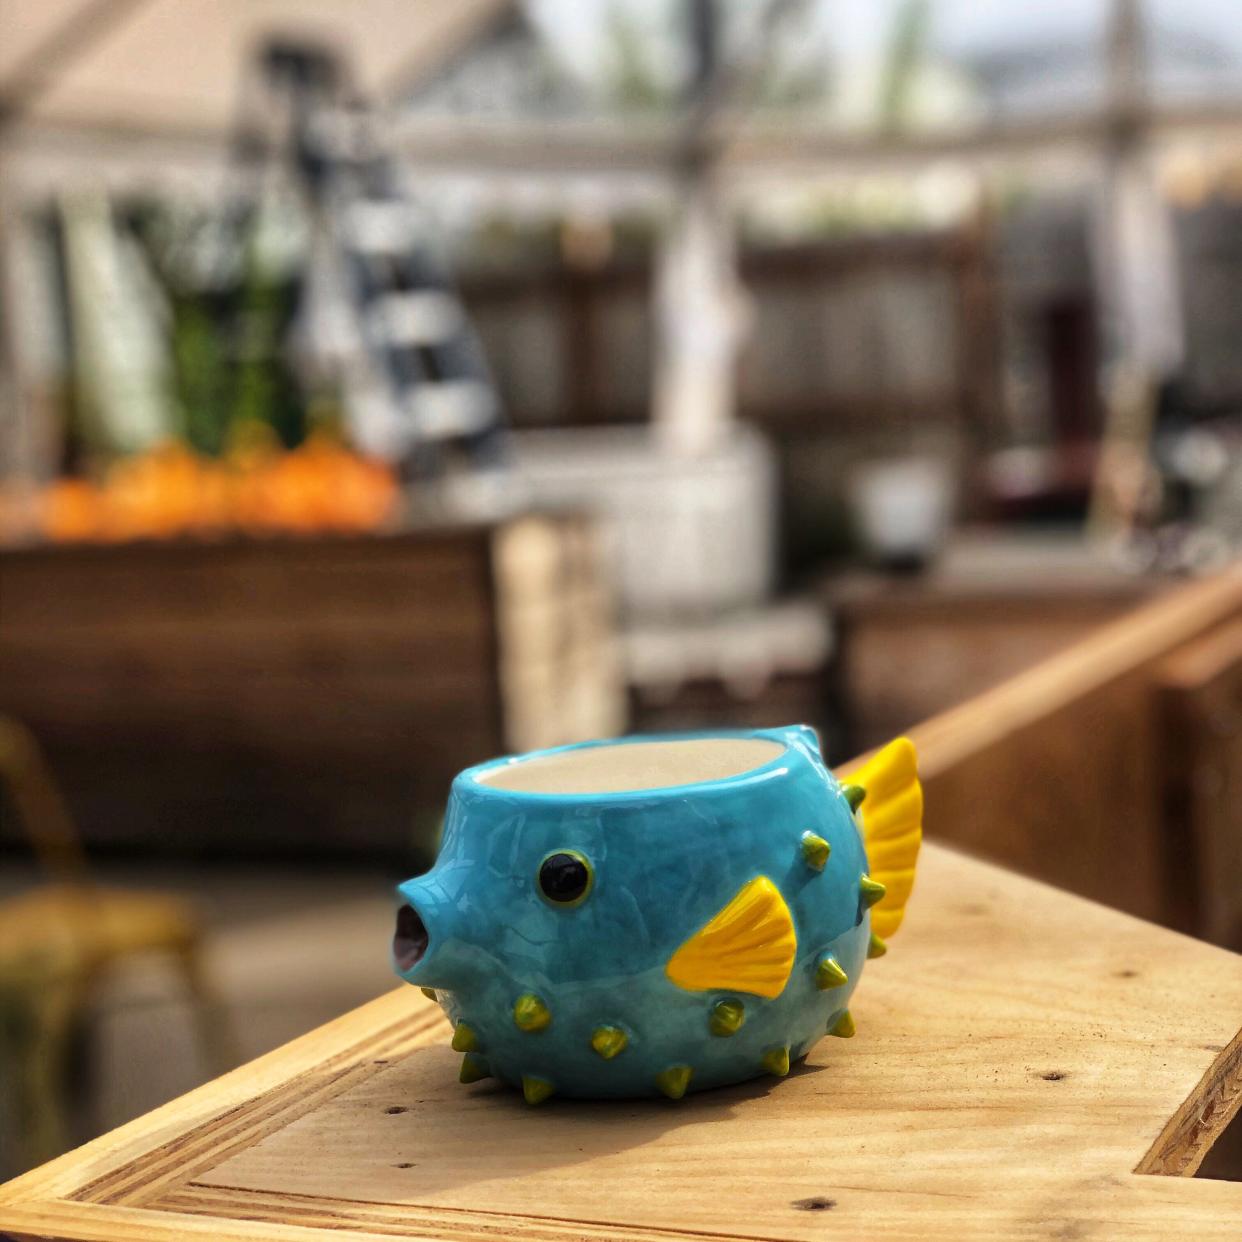 A pufferfish tiki mug for PufferFish, the tiki bar popping up at Hotel Metro in downtown MIlwaukee on June 10. The tiki bar is to start a residency on the hotel's rooftop June 23 that lasts into October.